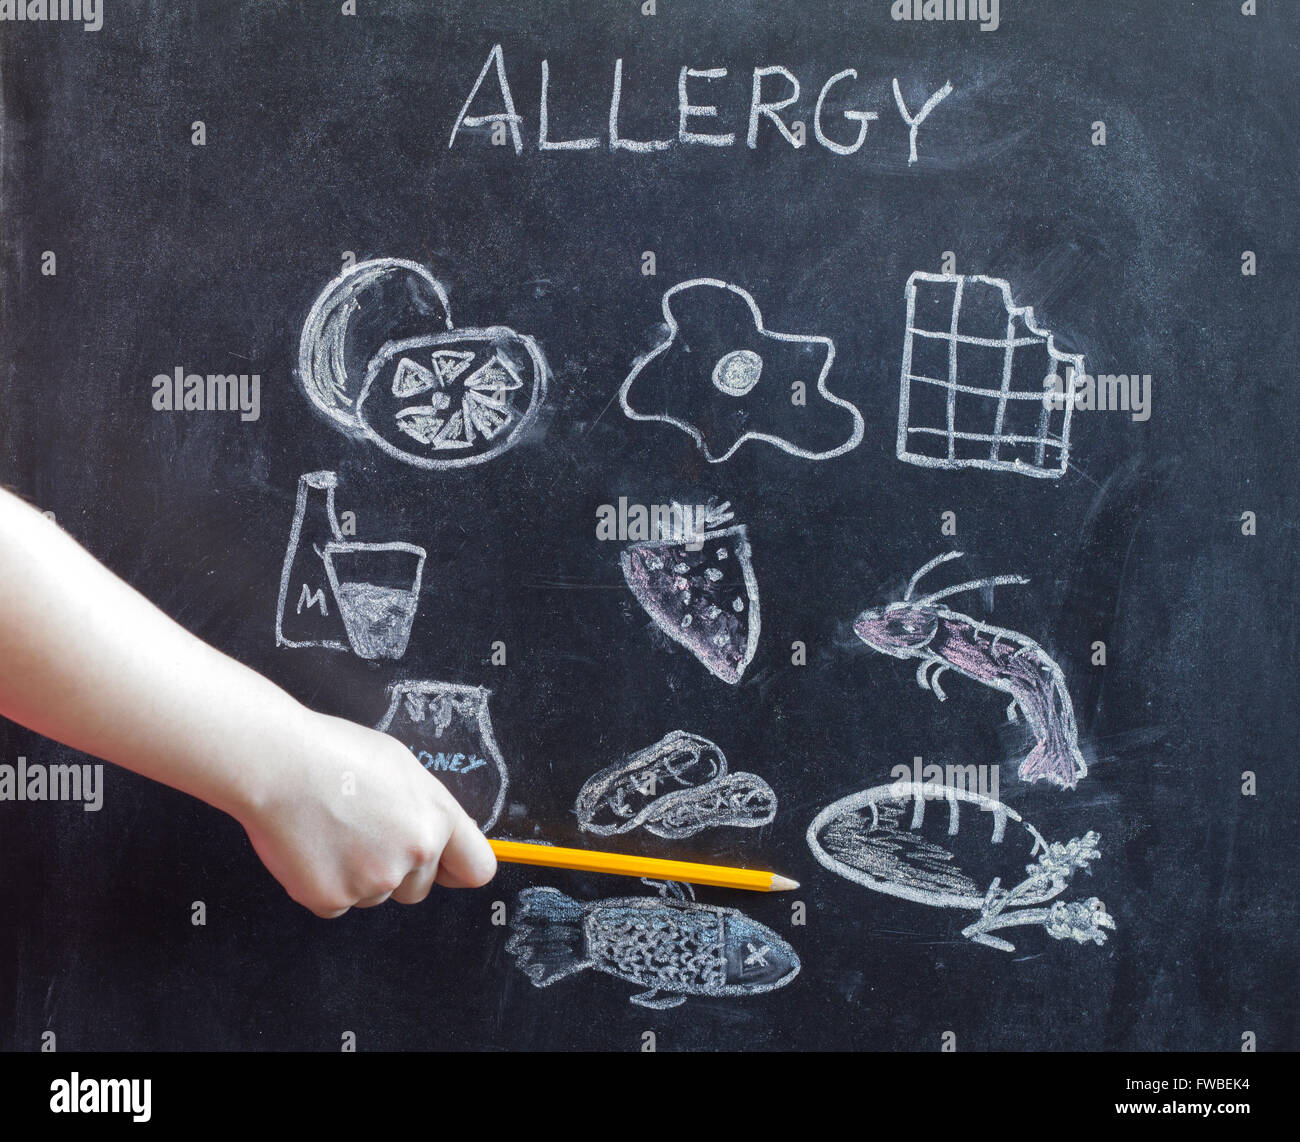 Allergy food and beverages on blackboard concept Stock Photo